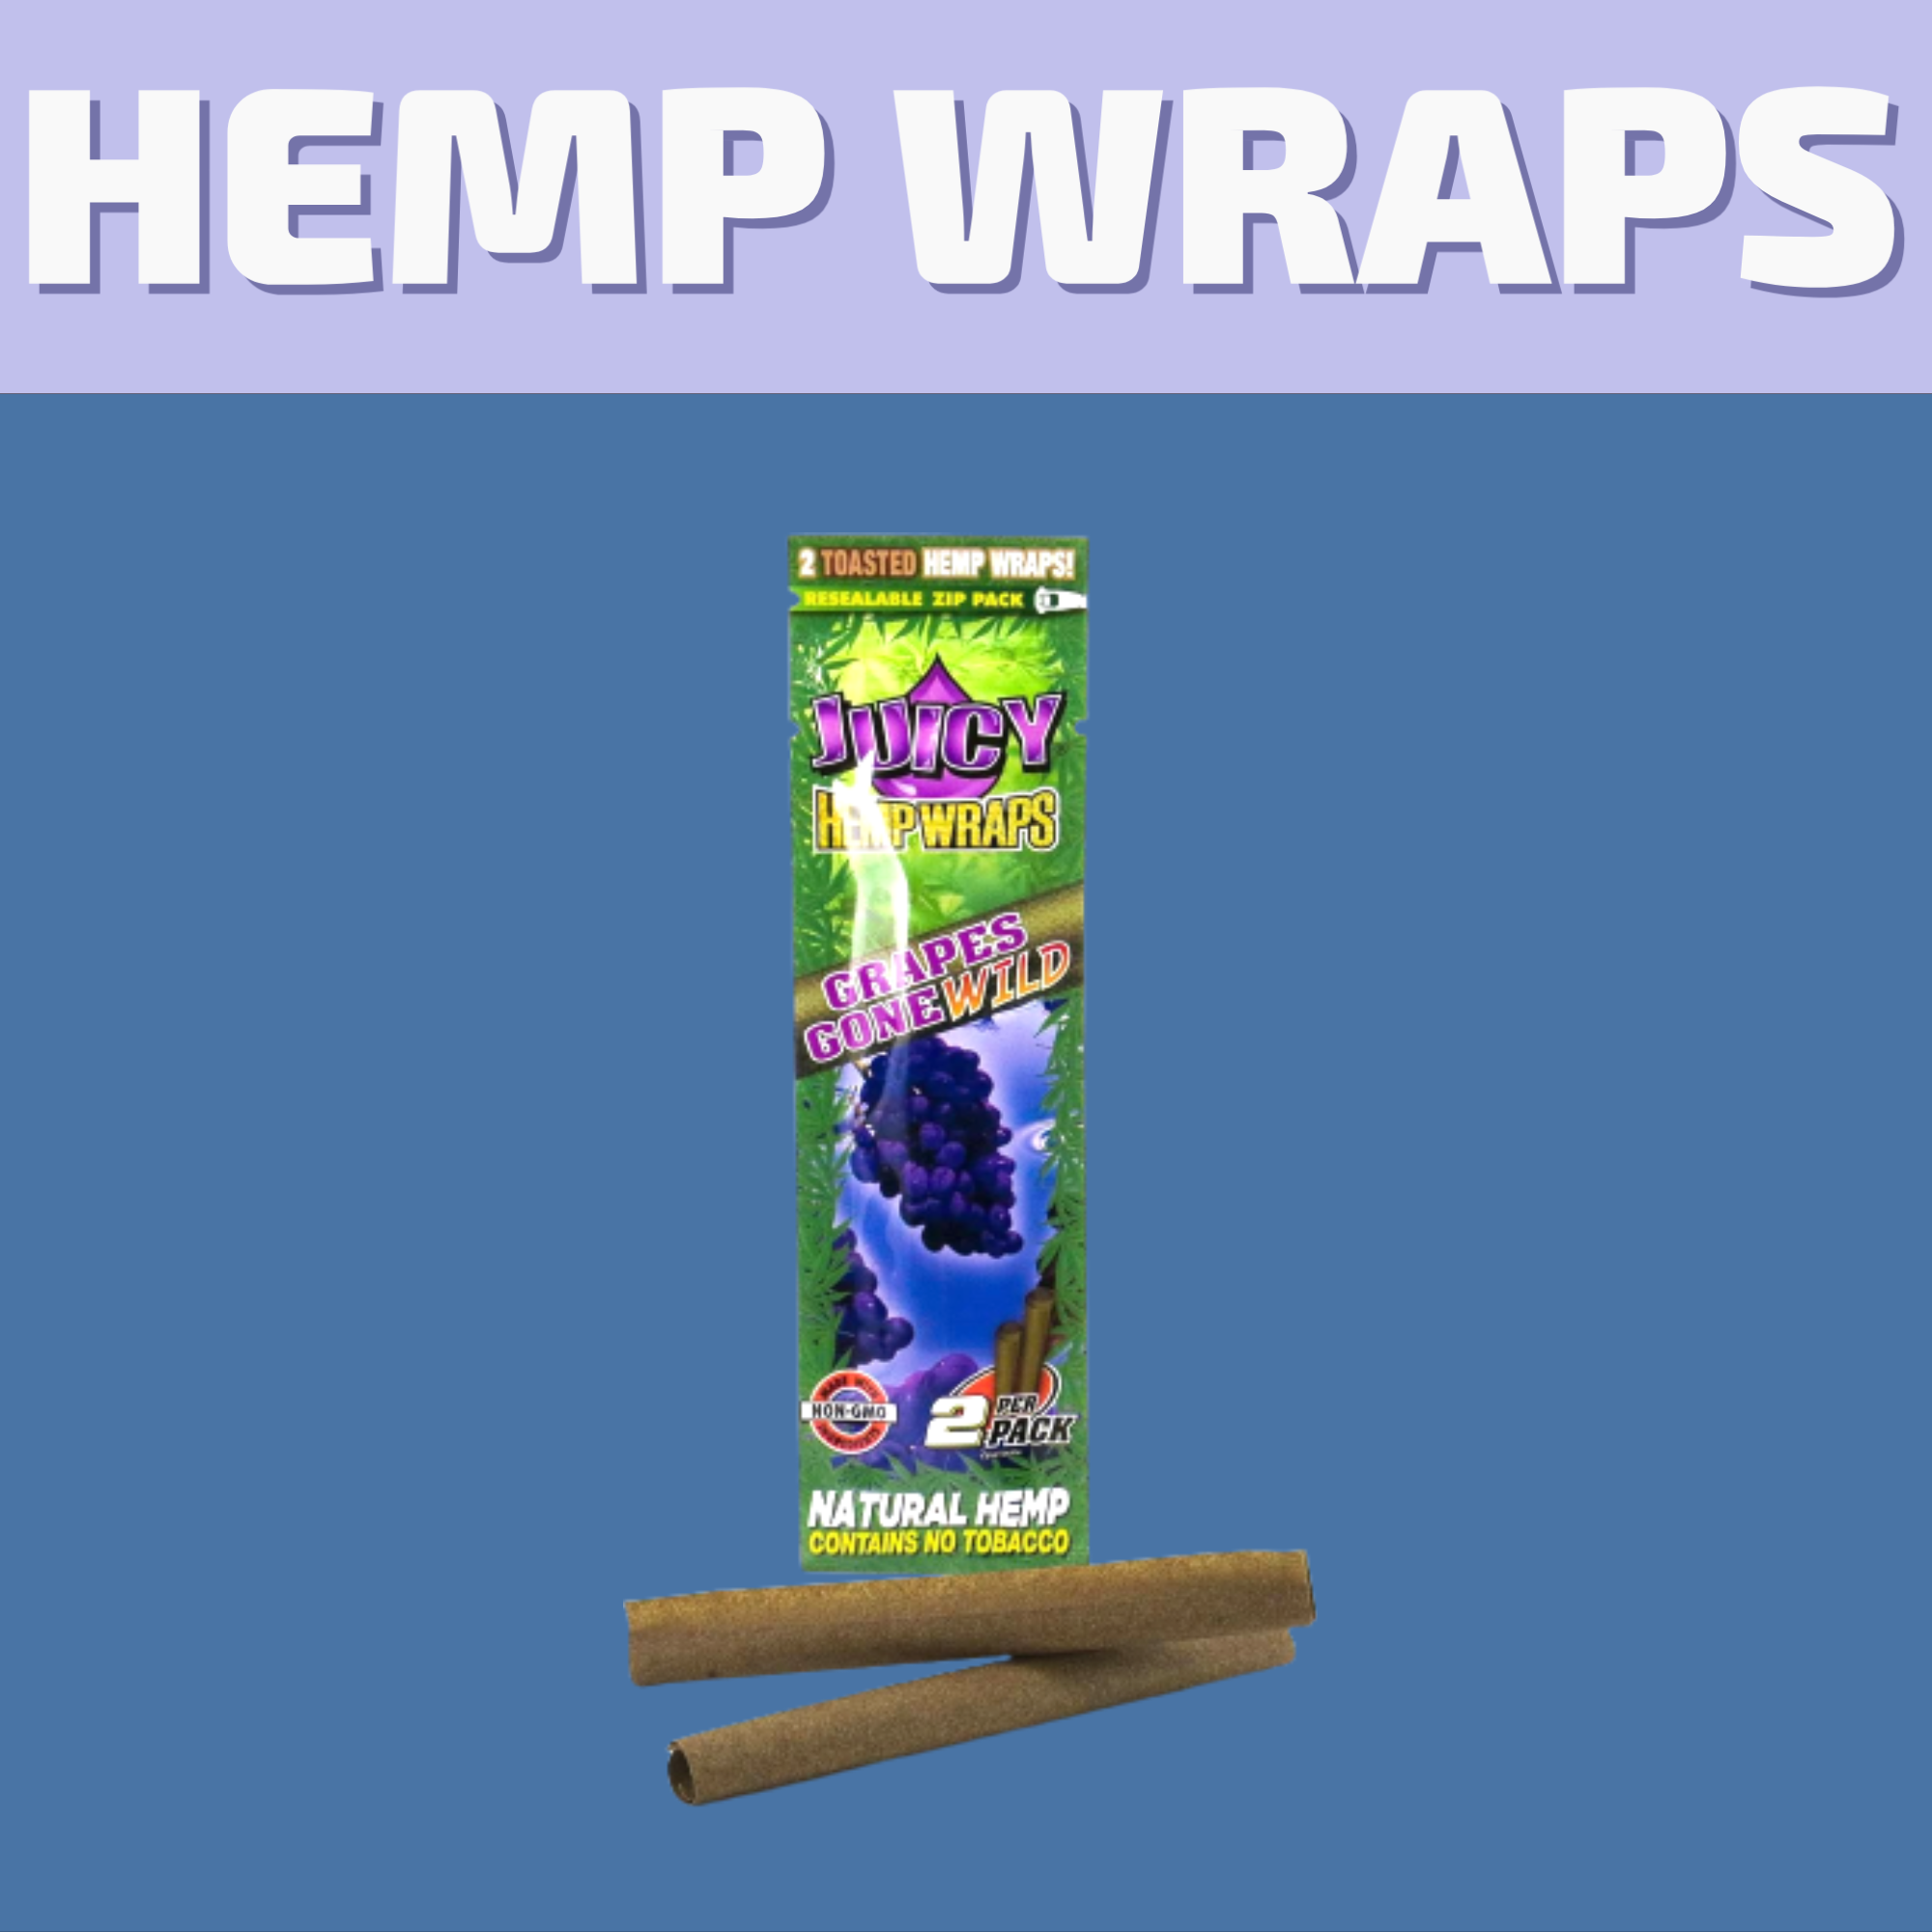 Shop our selection of Hemp Wraps for same day delivery in Winnipeg or visit our cannabis store on 580 Academy Road.